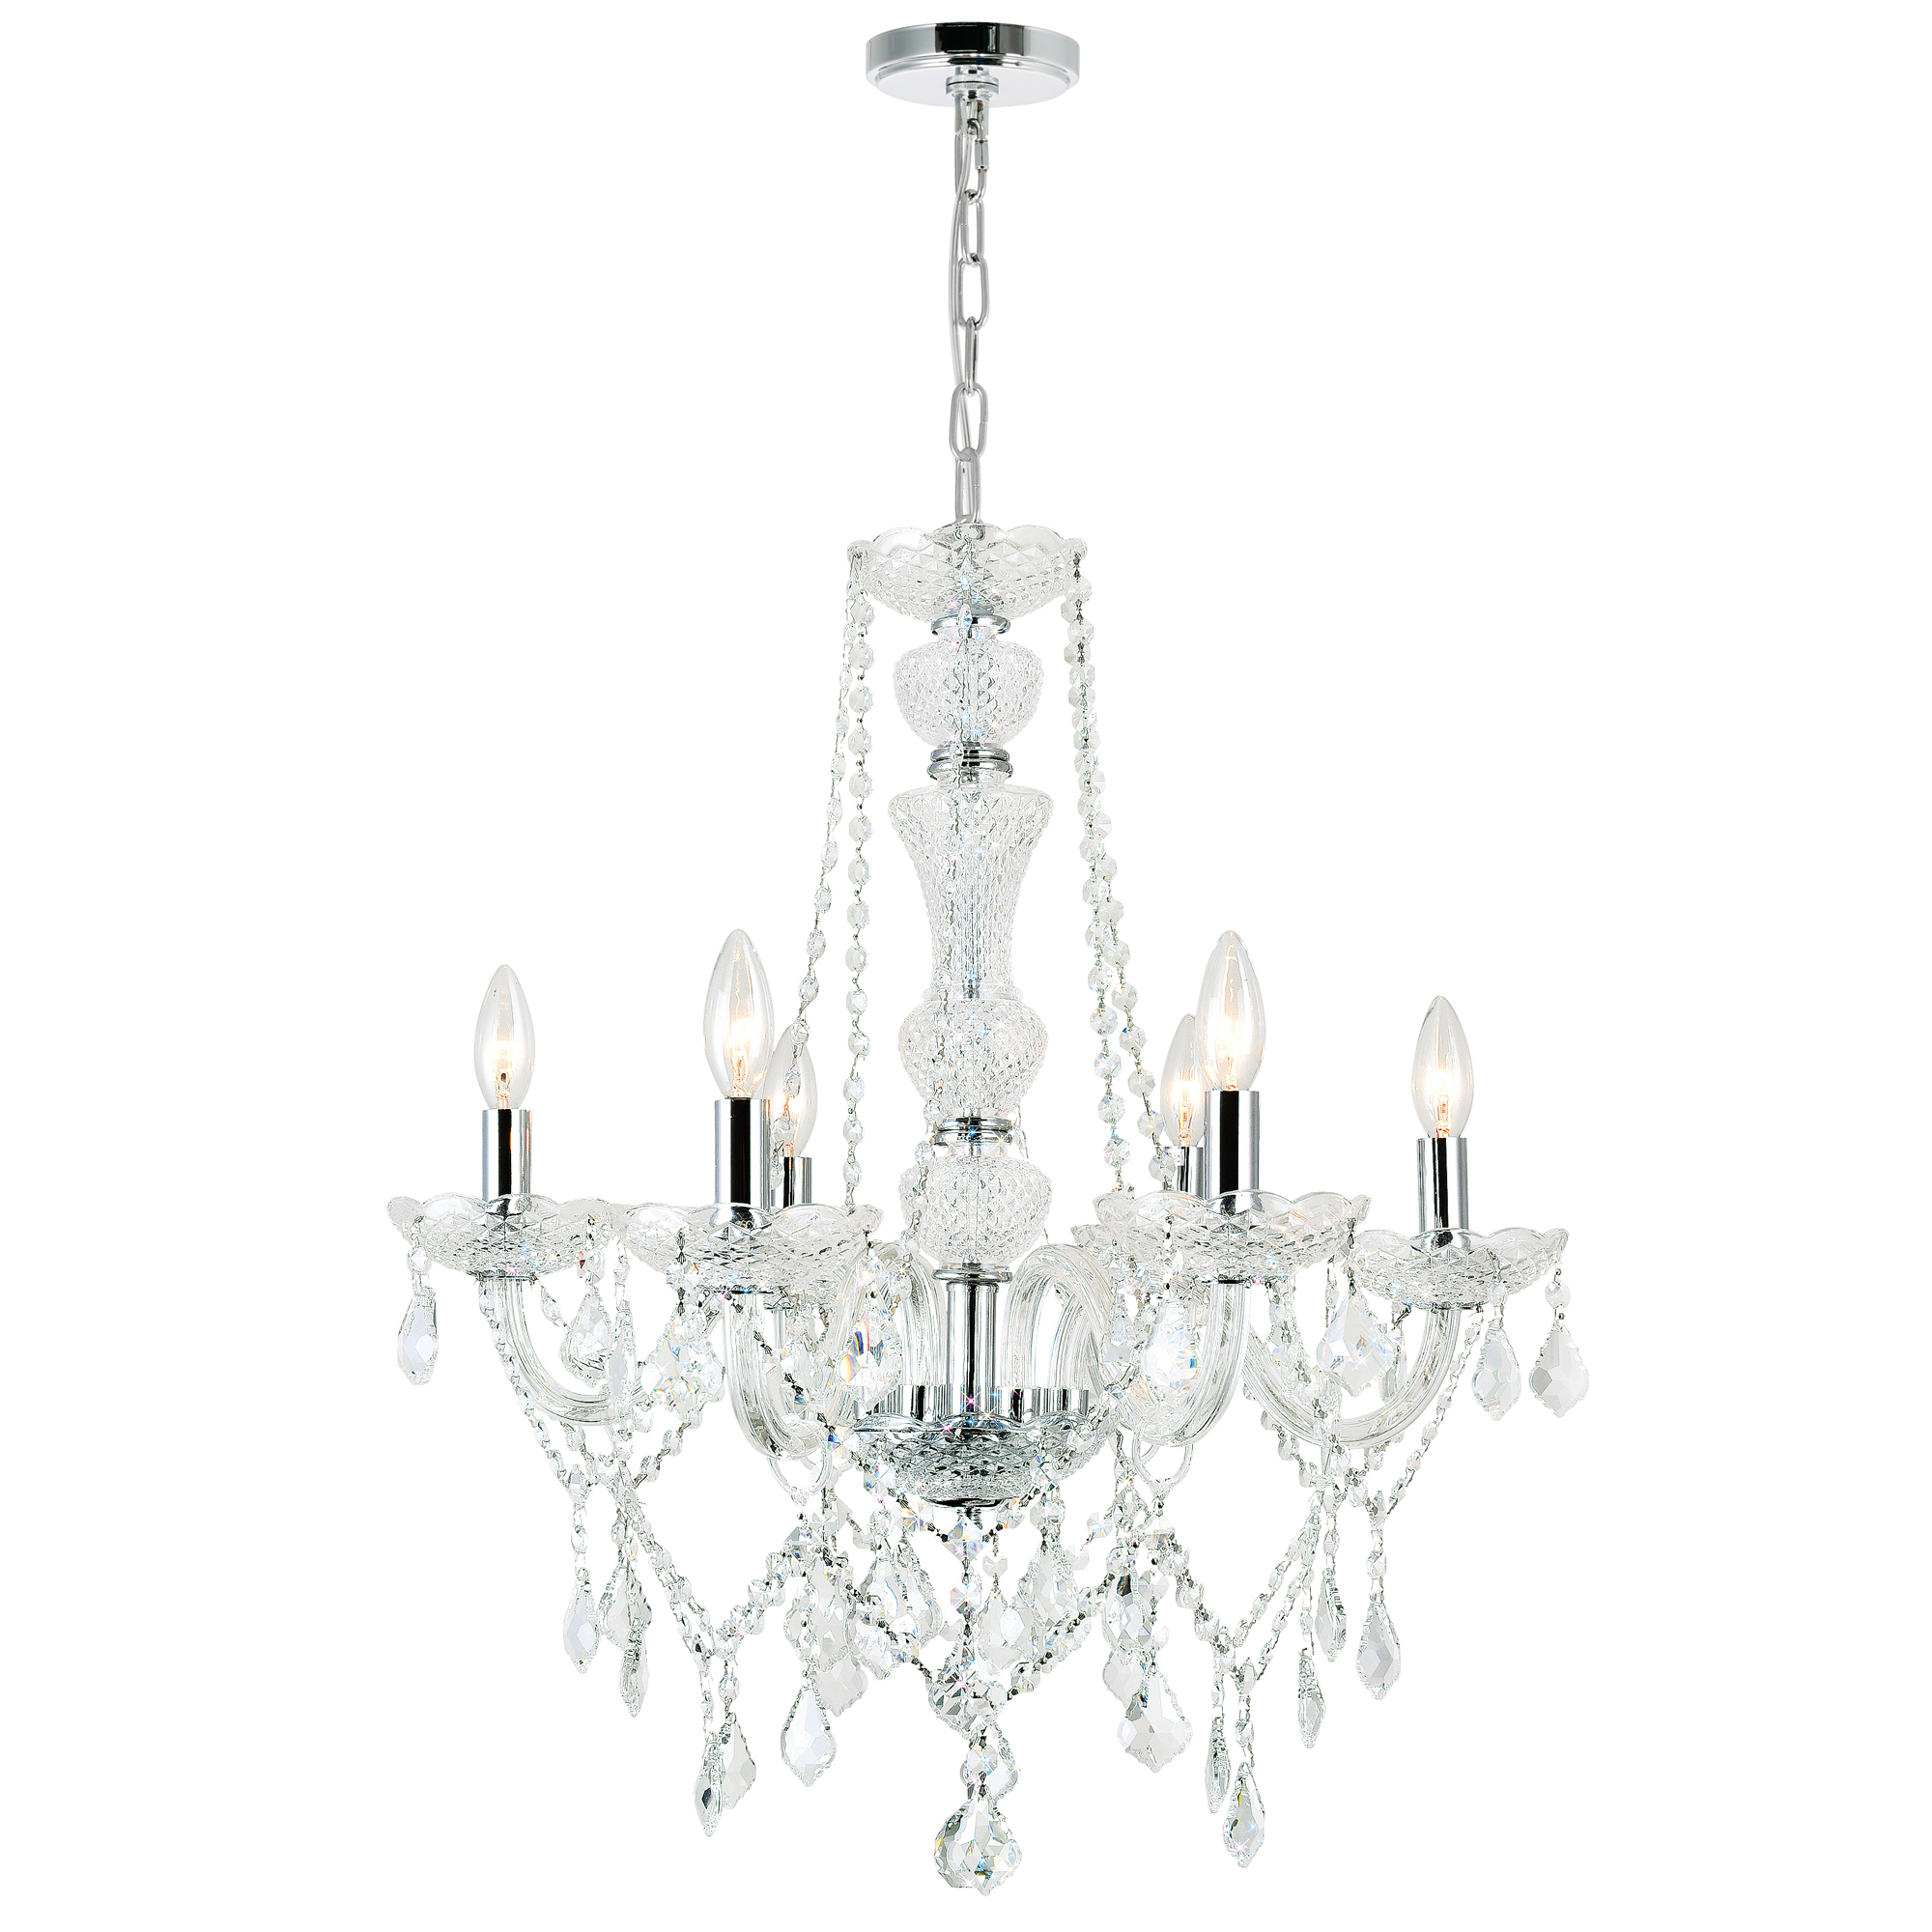 Princeton 6 Light Down Chandelier With Chrome Finish